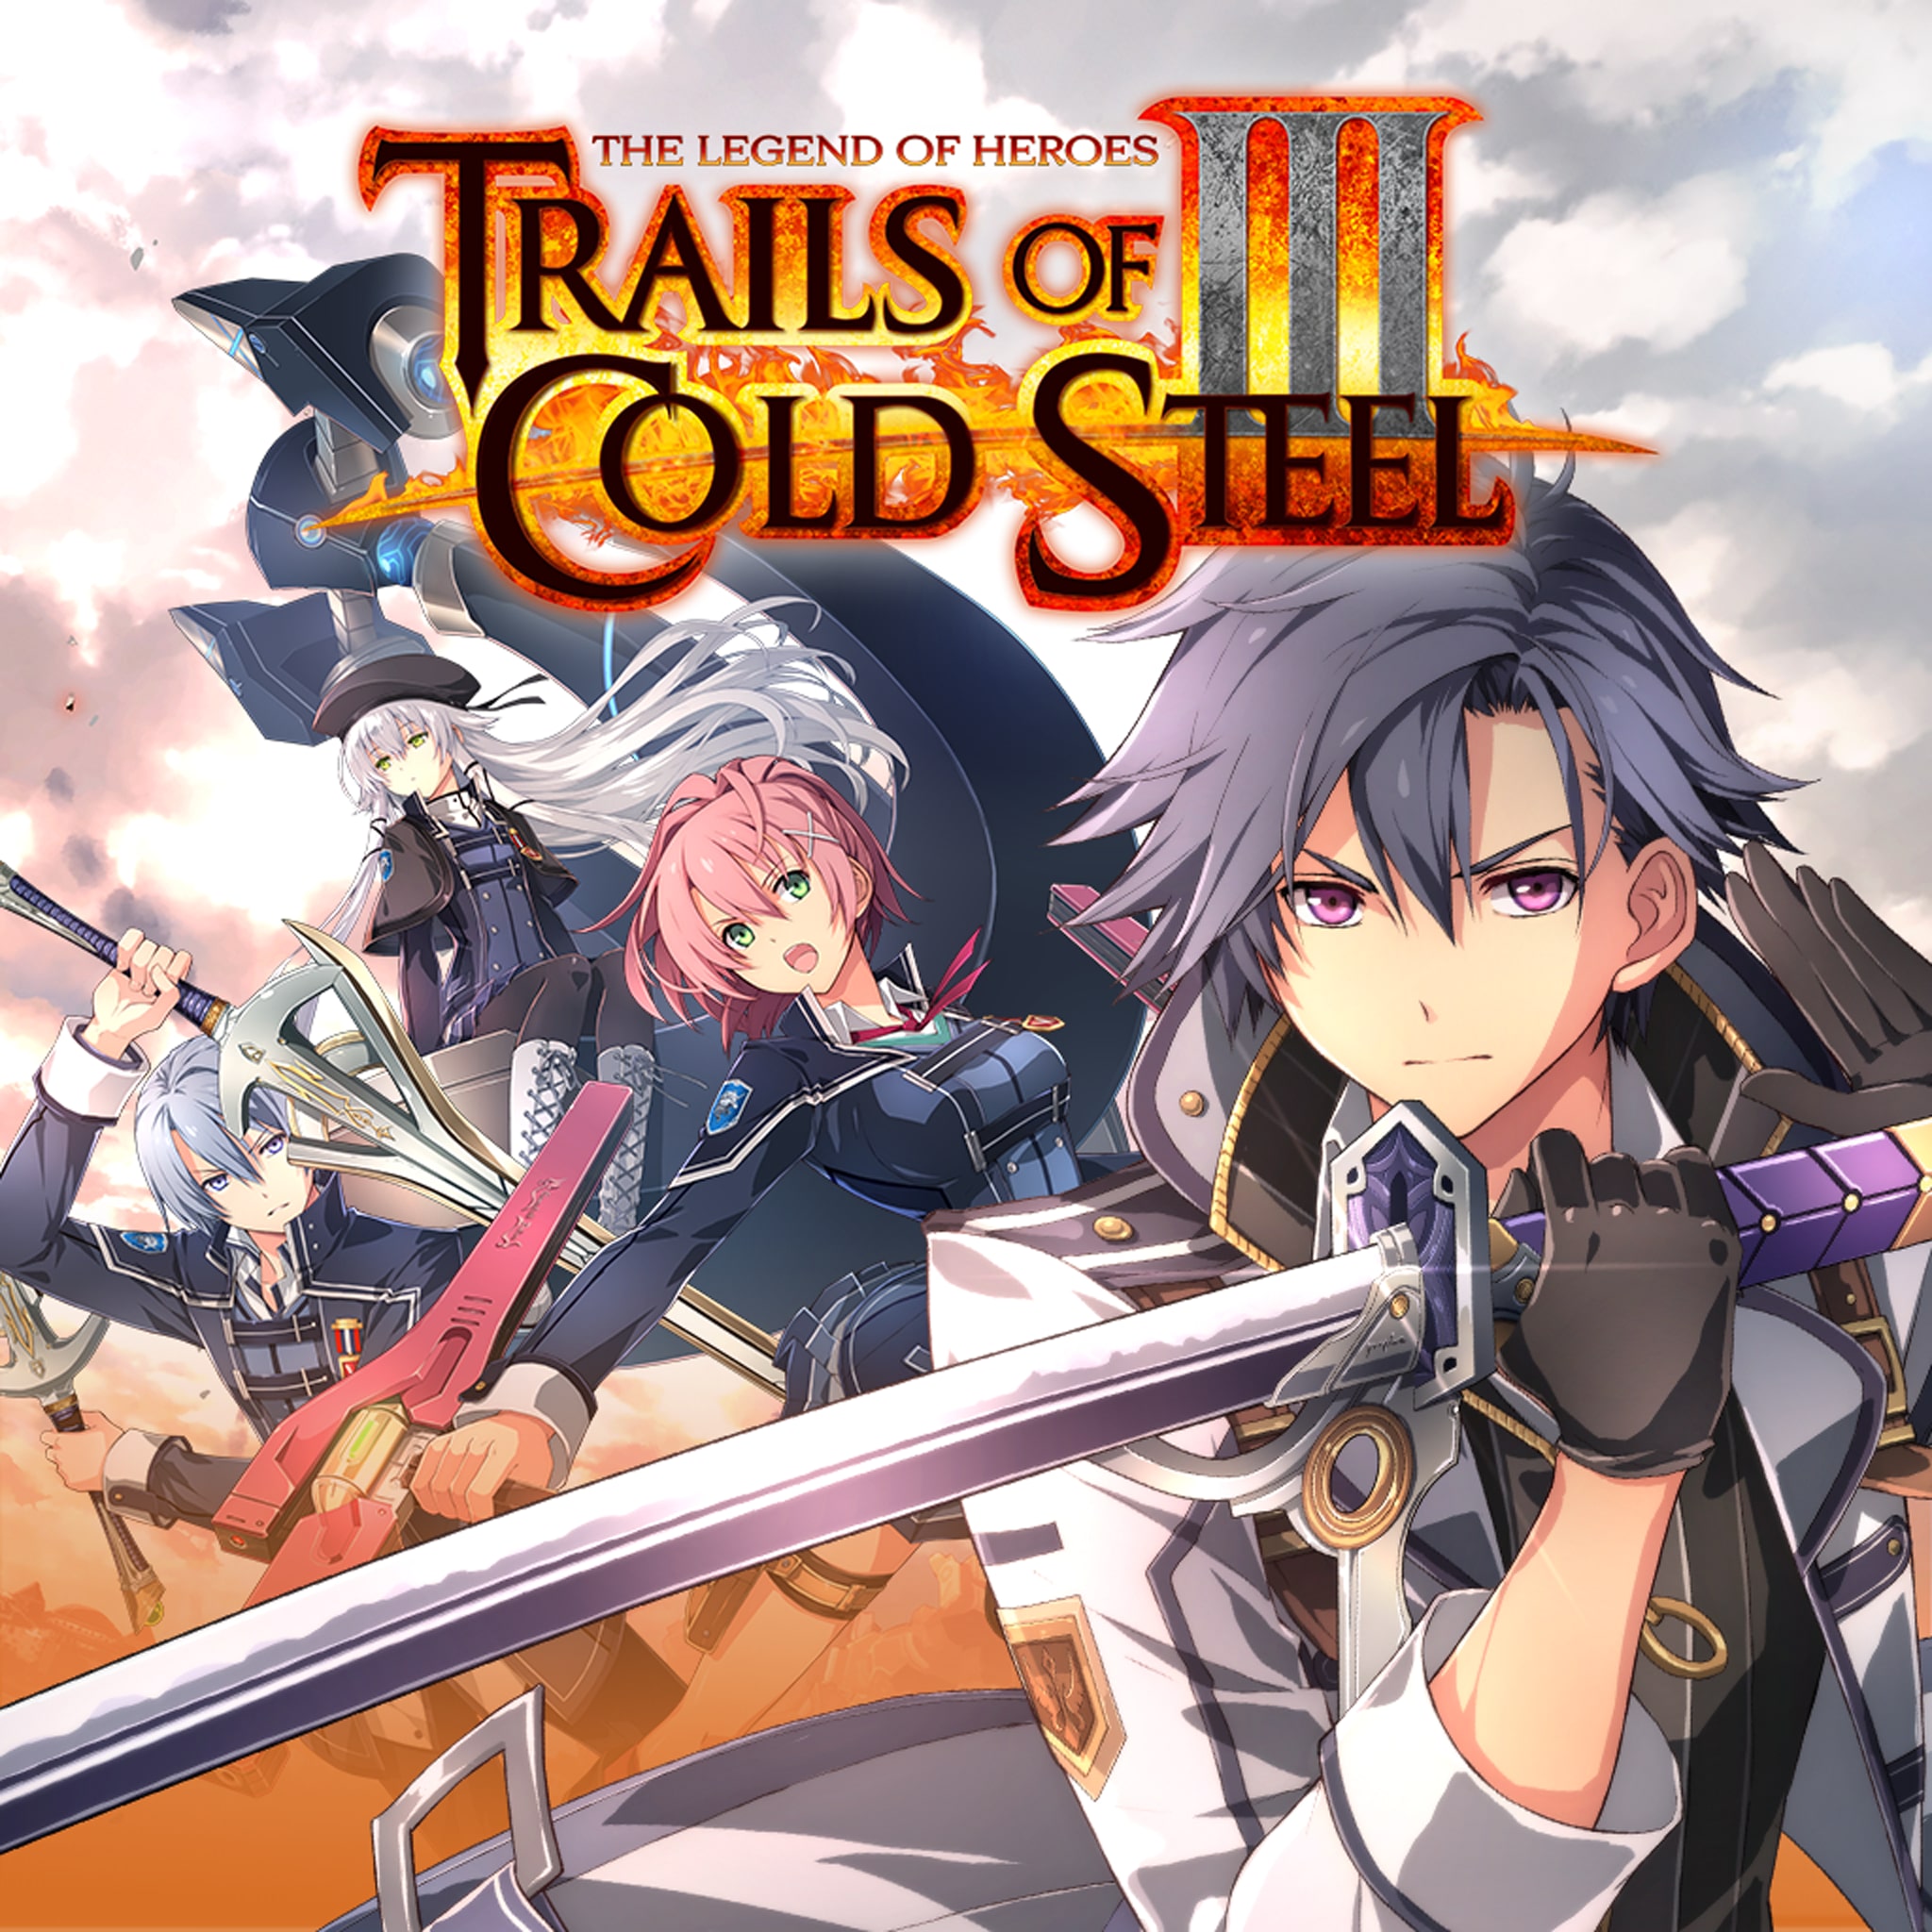 playstation store trails of cold steel 3